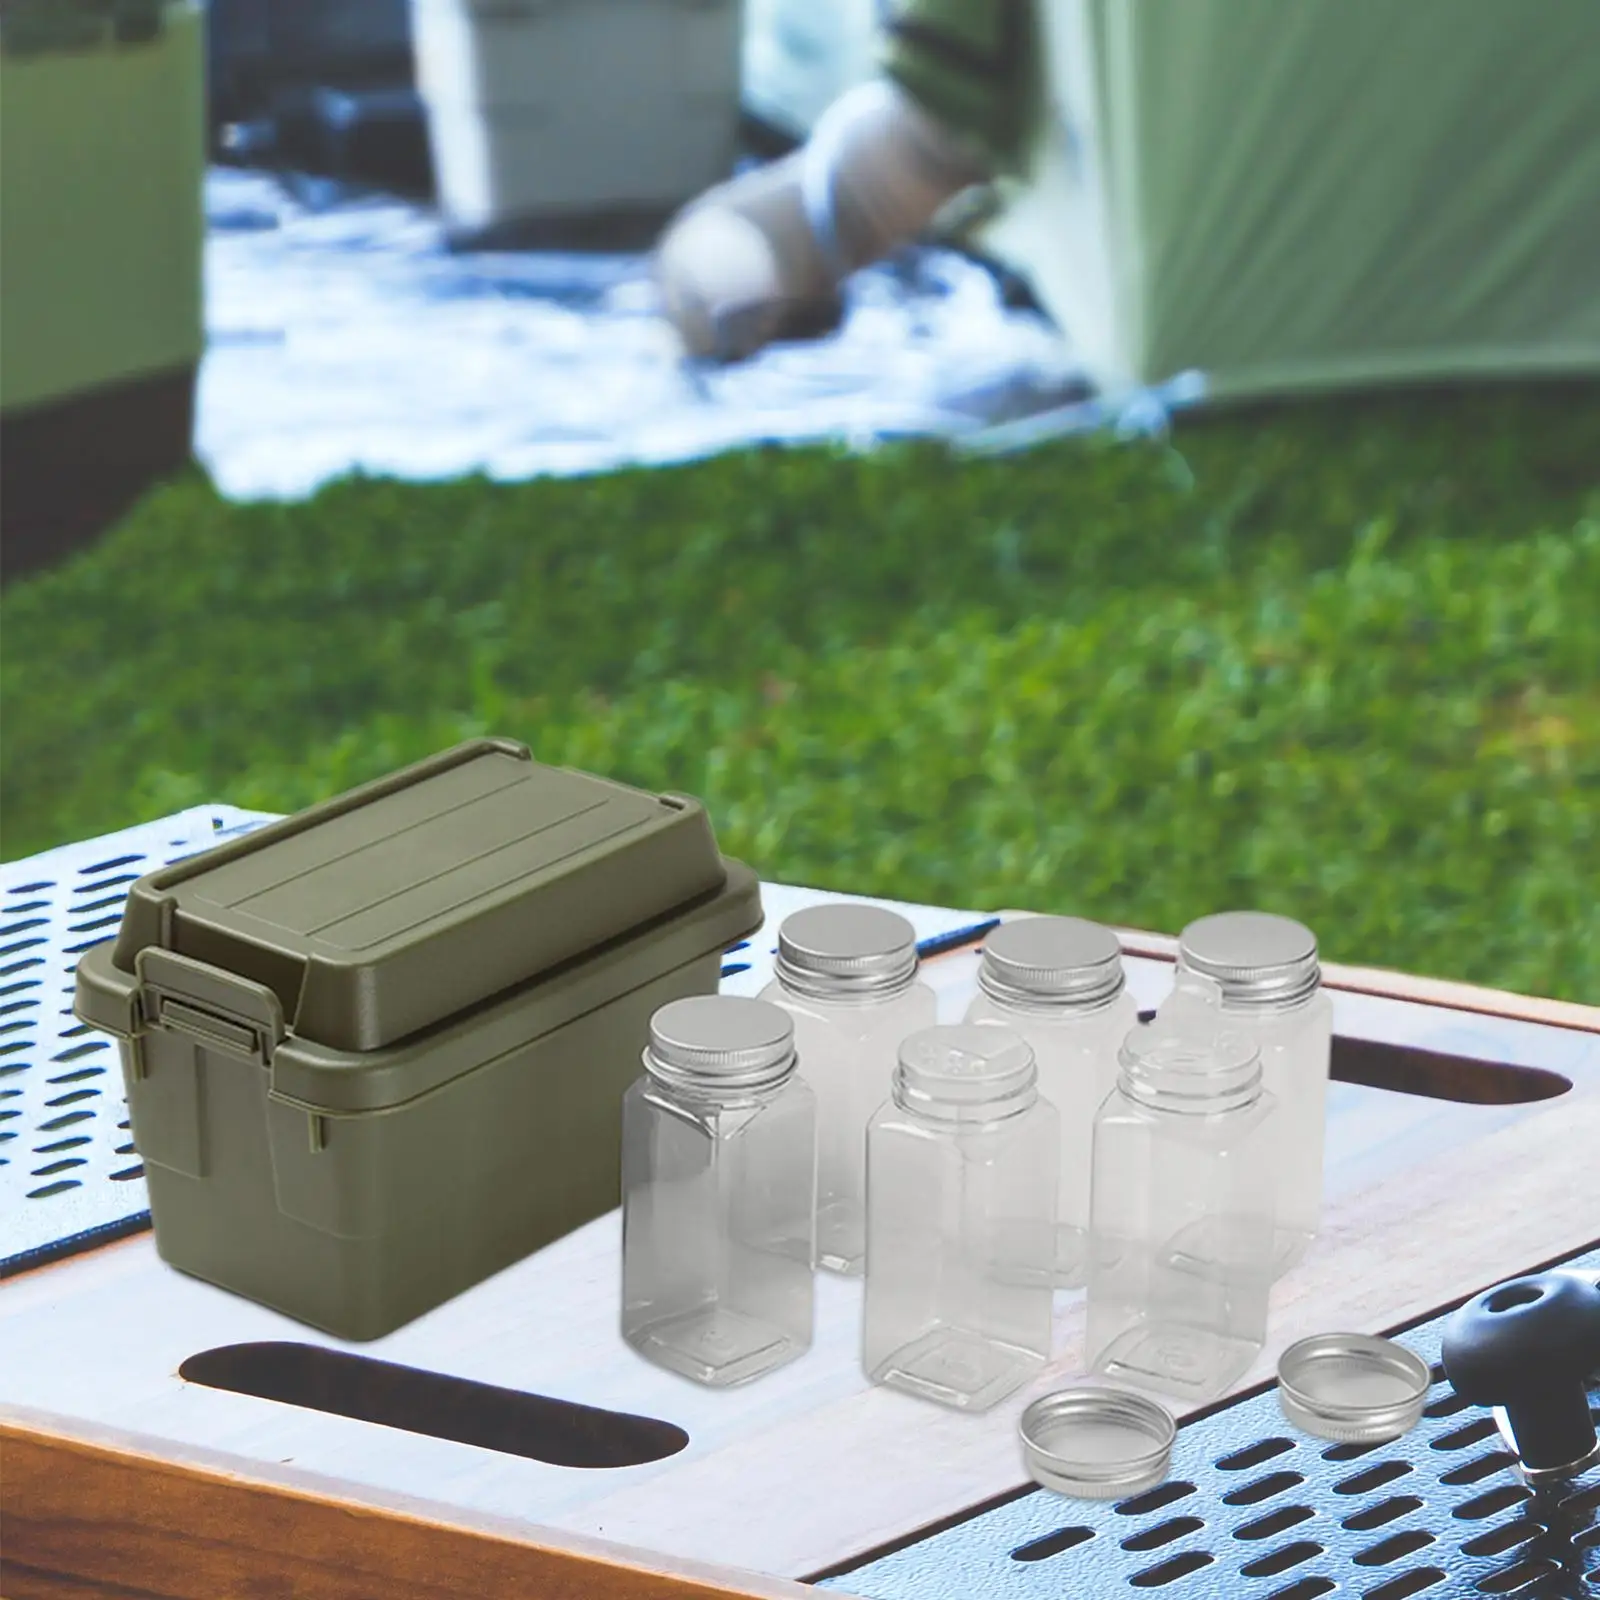 6Pcs Camping Spice Jars Sauce Organizer Portable Spice Organizer Seasoning Bottle for Home Backpacking Picnic Cooking Travel